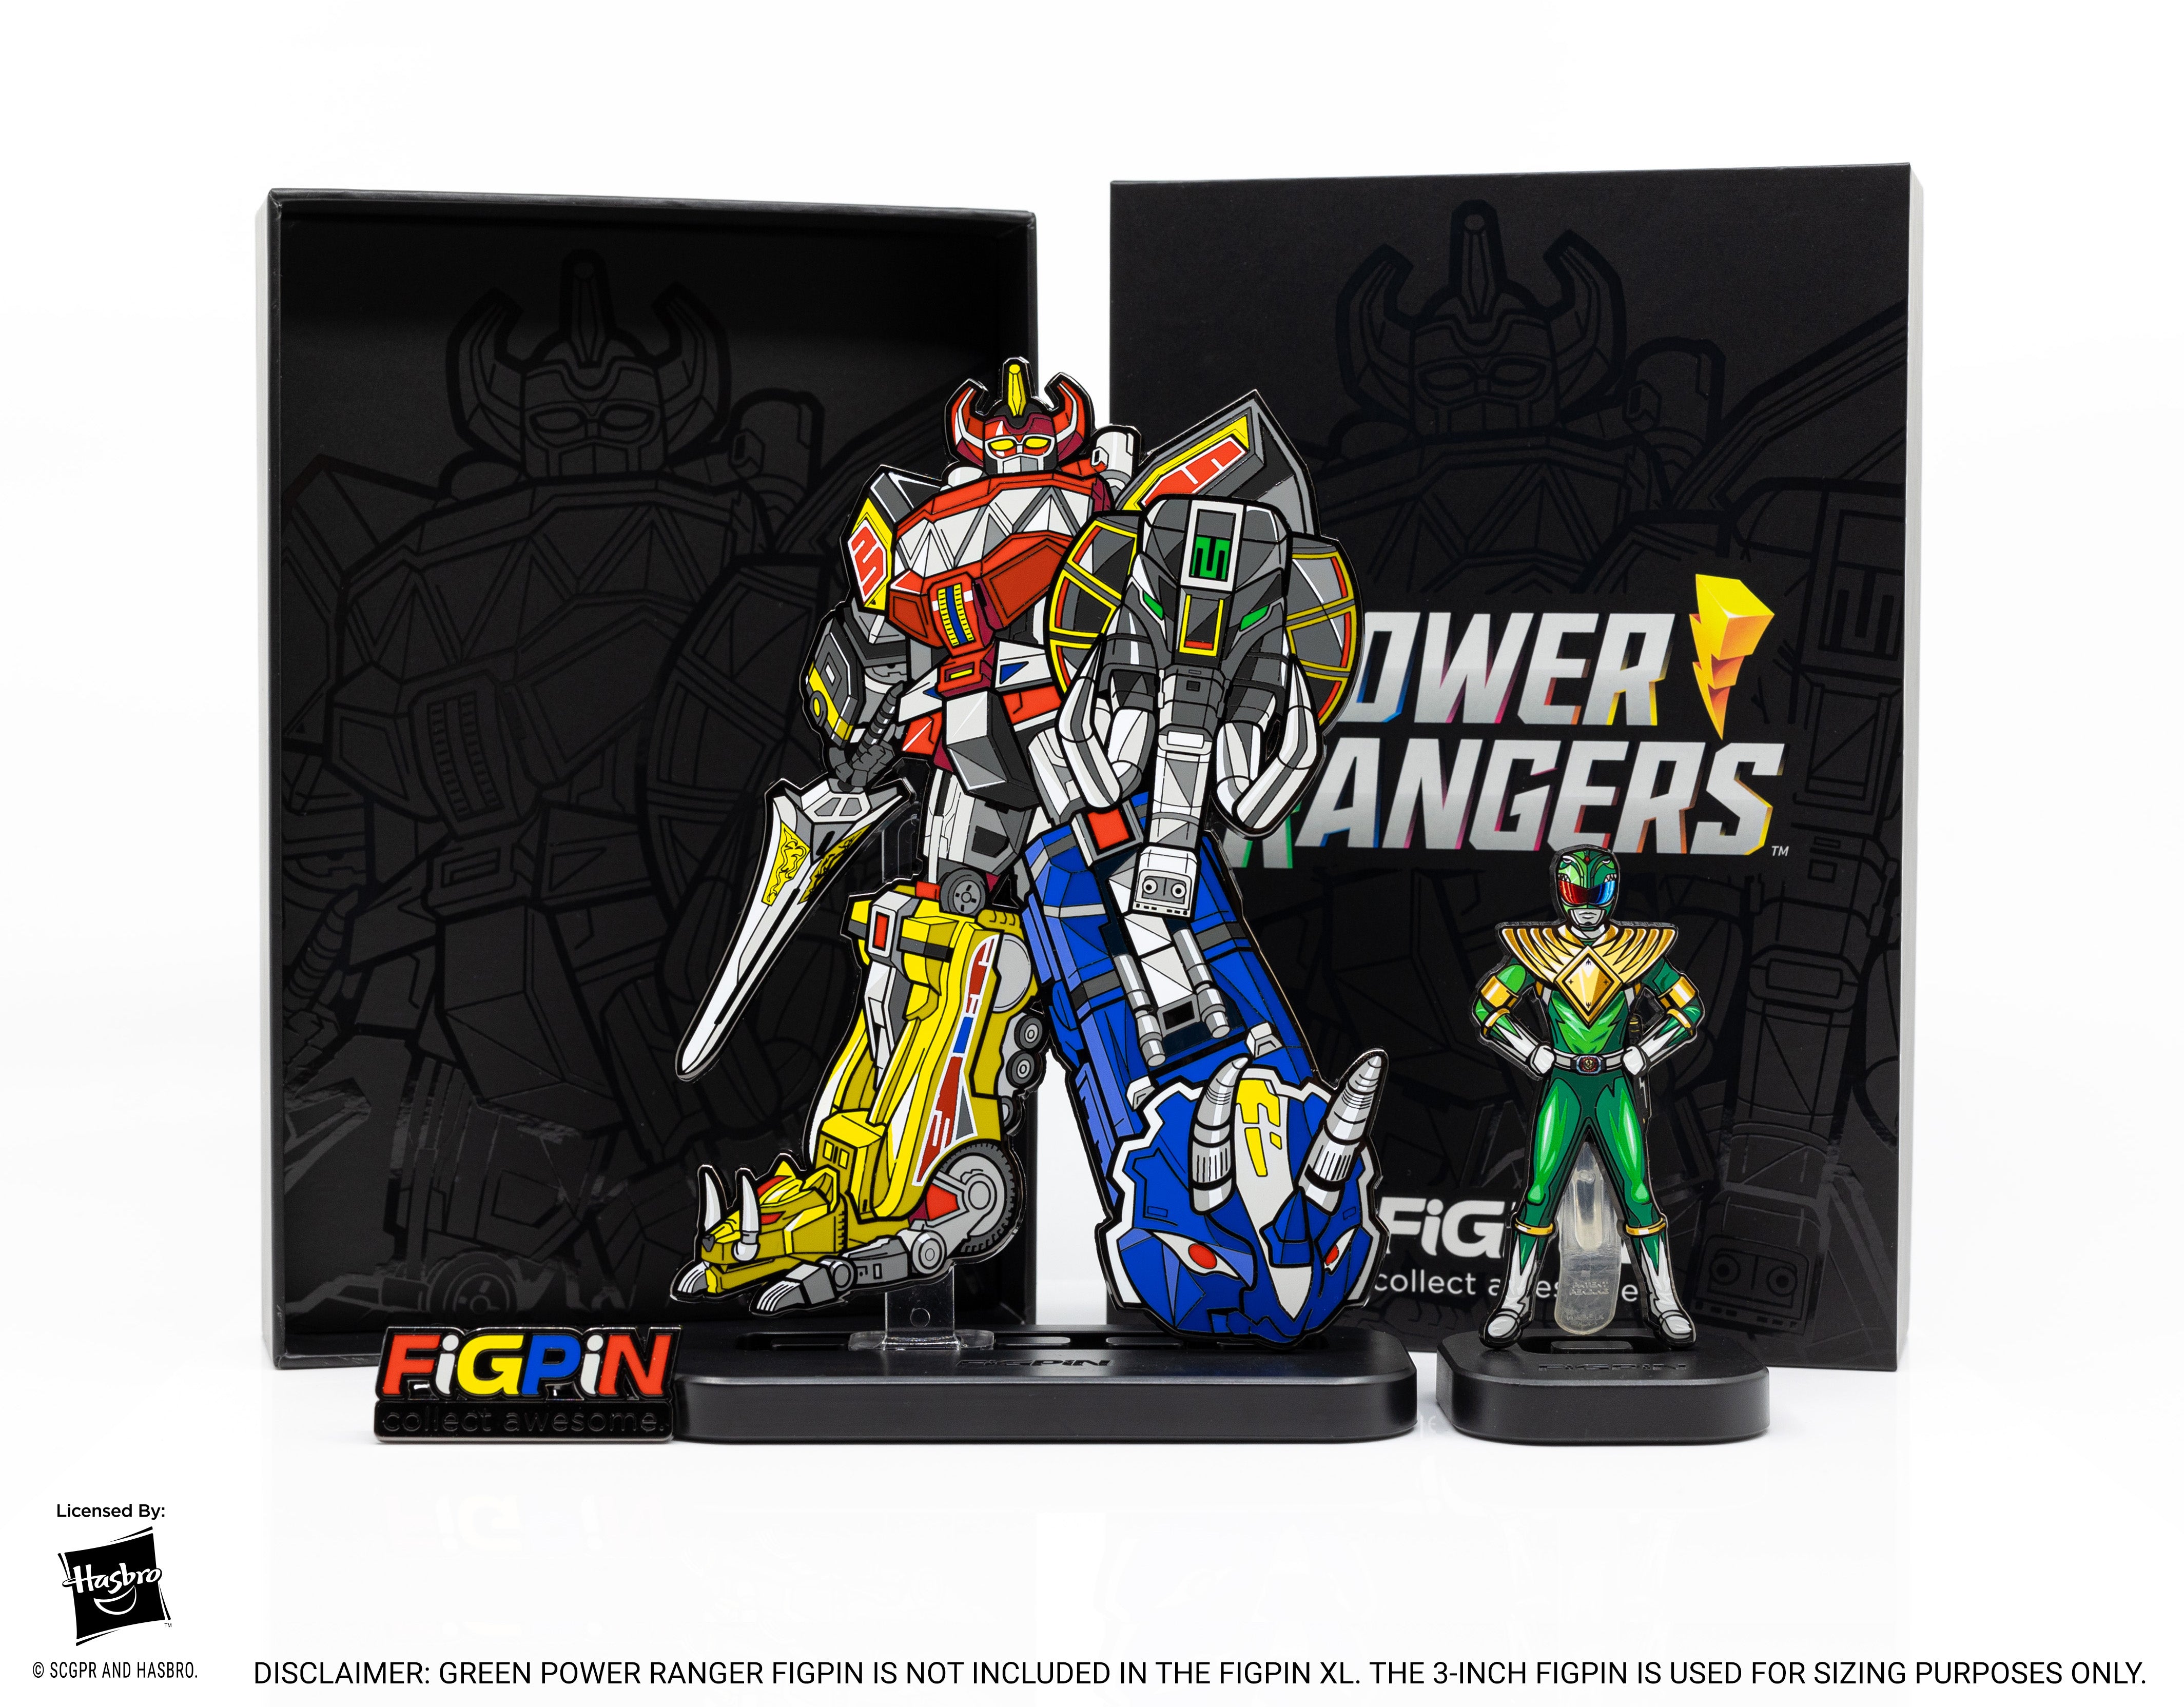 Display of Power Rangers Megazord FiGPiN XL, Packaging, FiGPiN XL Logo enamel pin, and Green Ranger FiGPiN for size purposes.